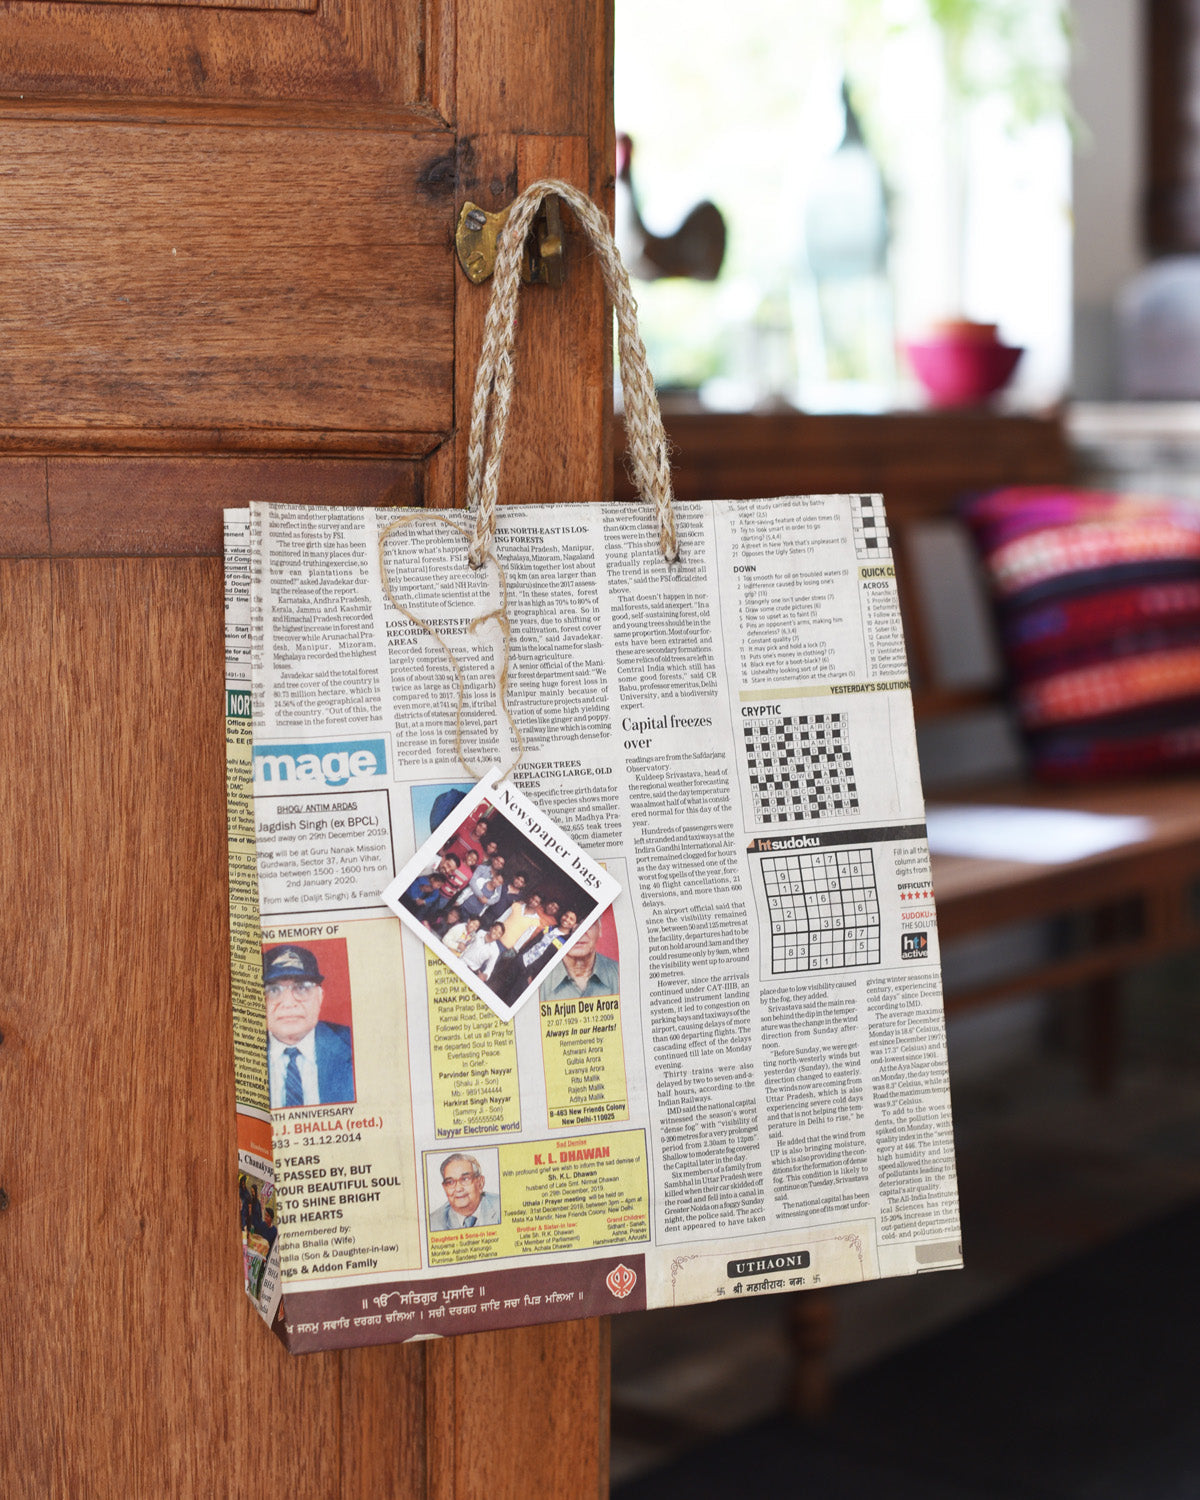 Indian Newspaper Bags - The Ethical Shop